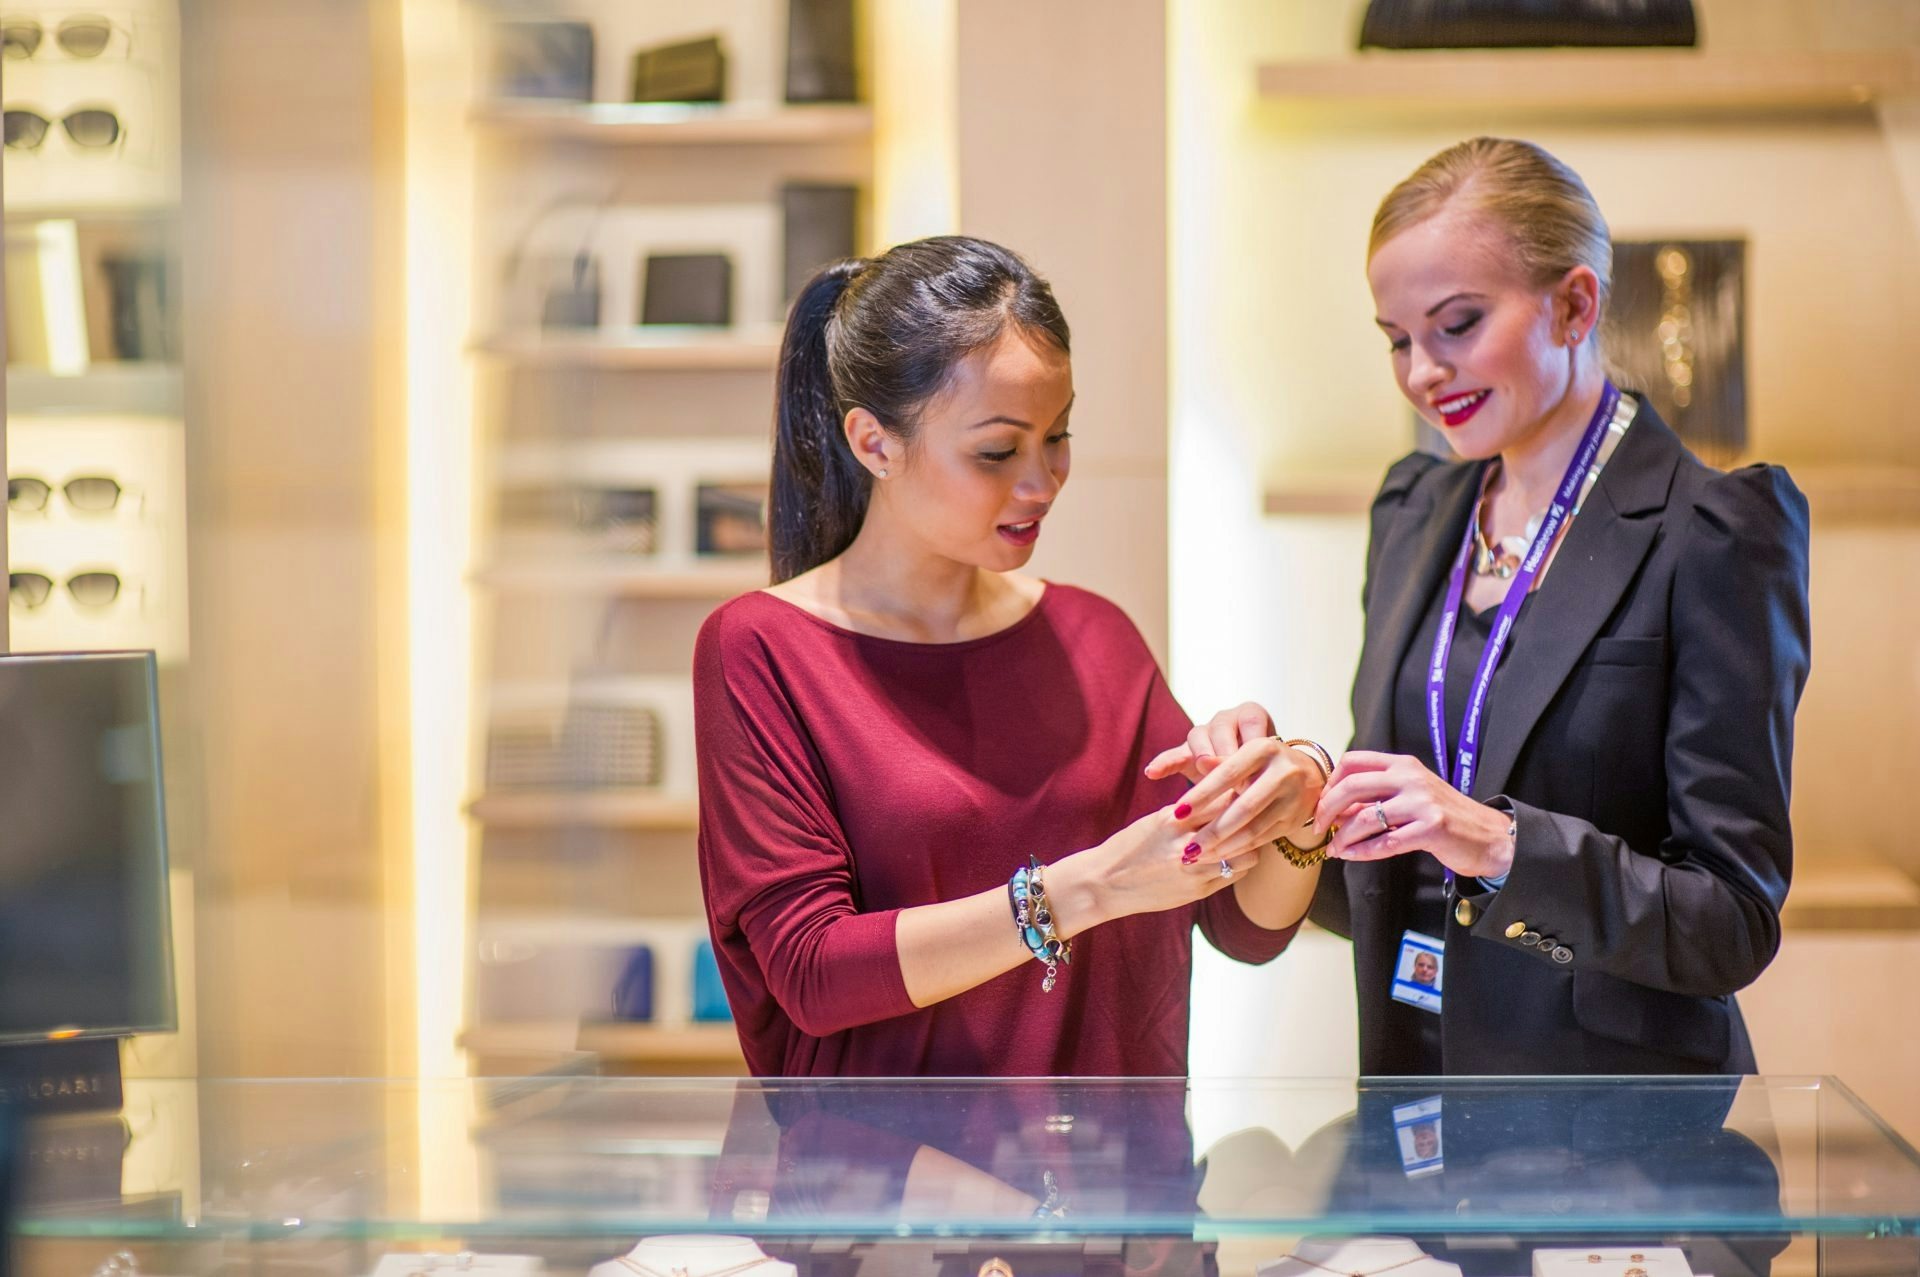 Heathrow Airport's passenger ambassadors were found to actively pursue Chinese travelers to encourage them to spend money in airport stores. (Courtesy Photo)